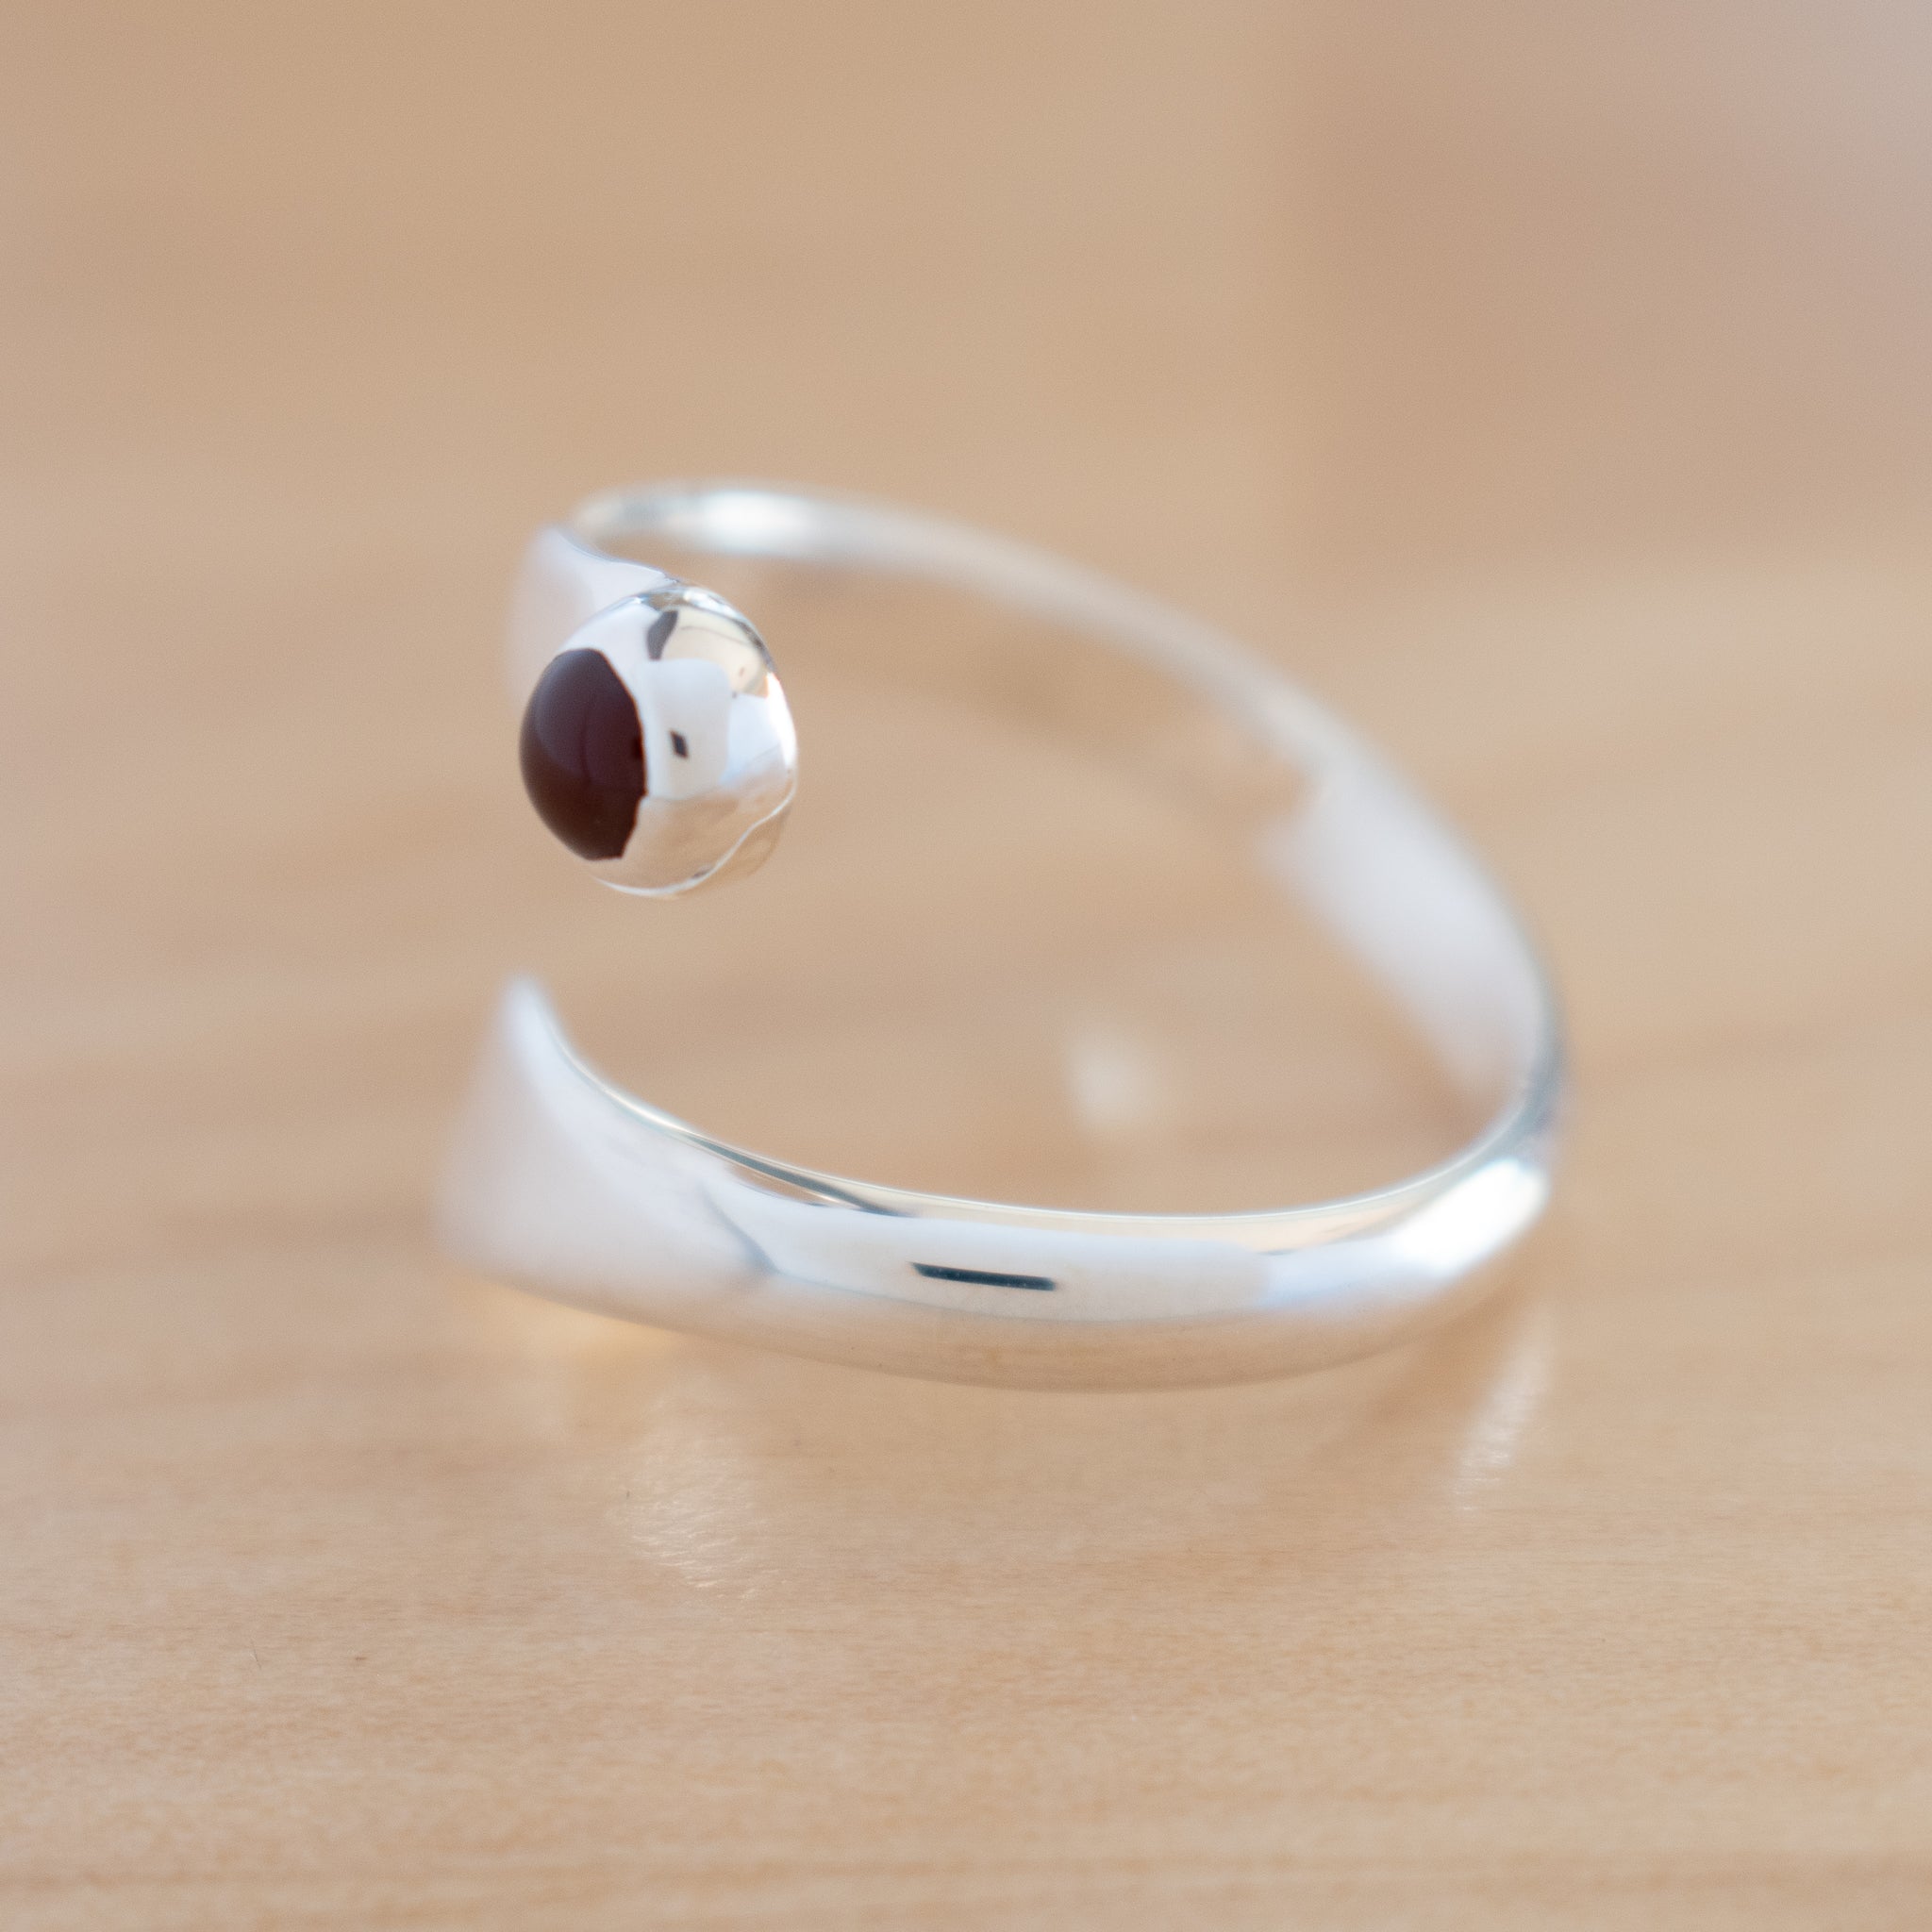 The heart of jewellery | Single Stone Ring Silver with zircon stone